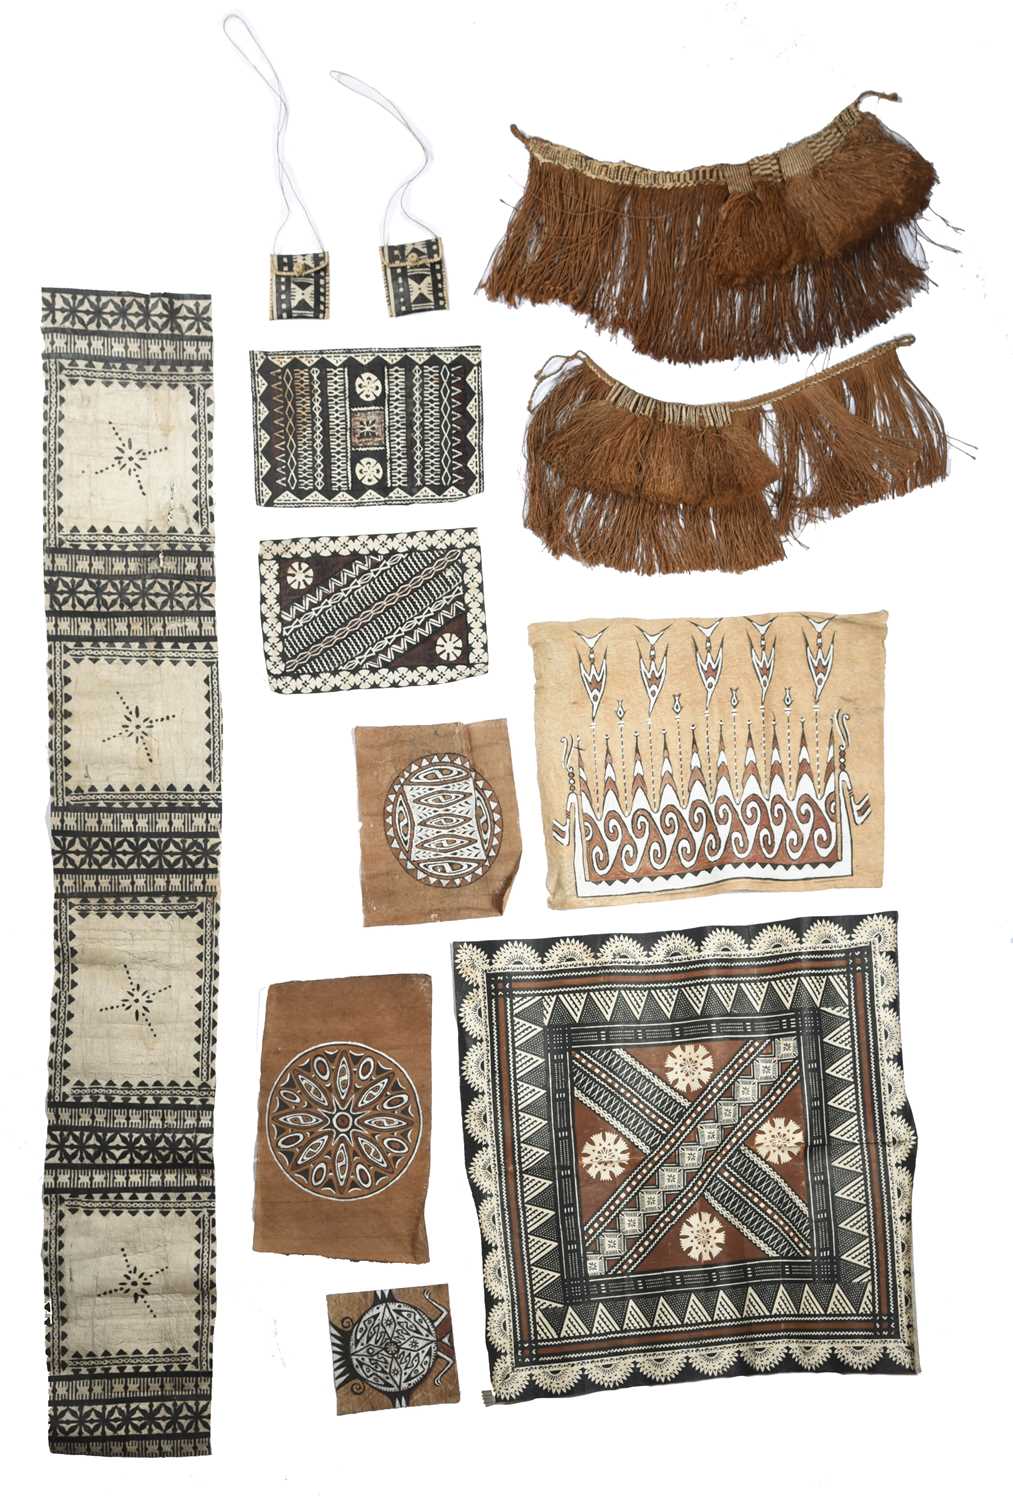 Two Baliem Valley skirts